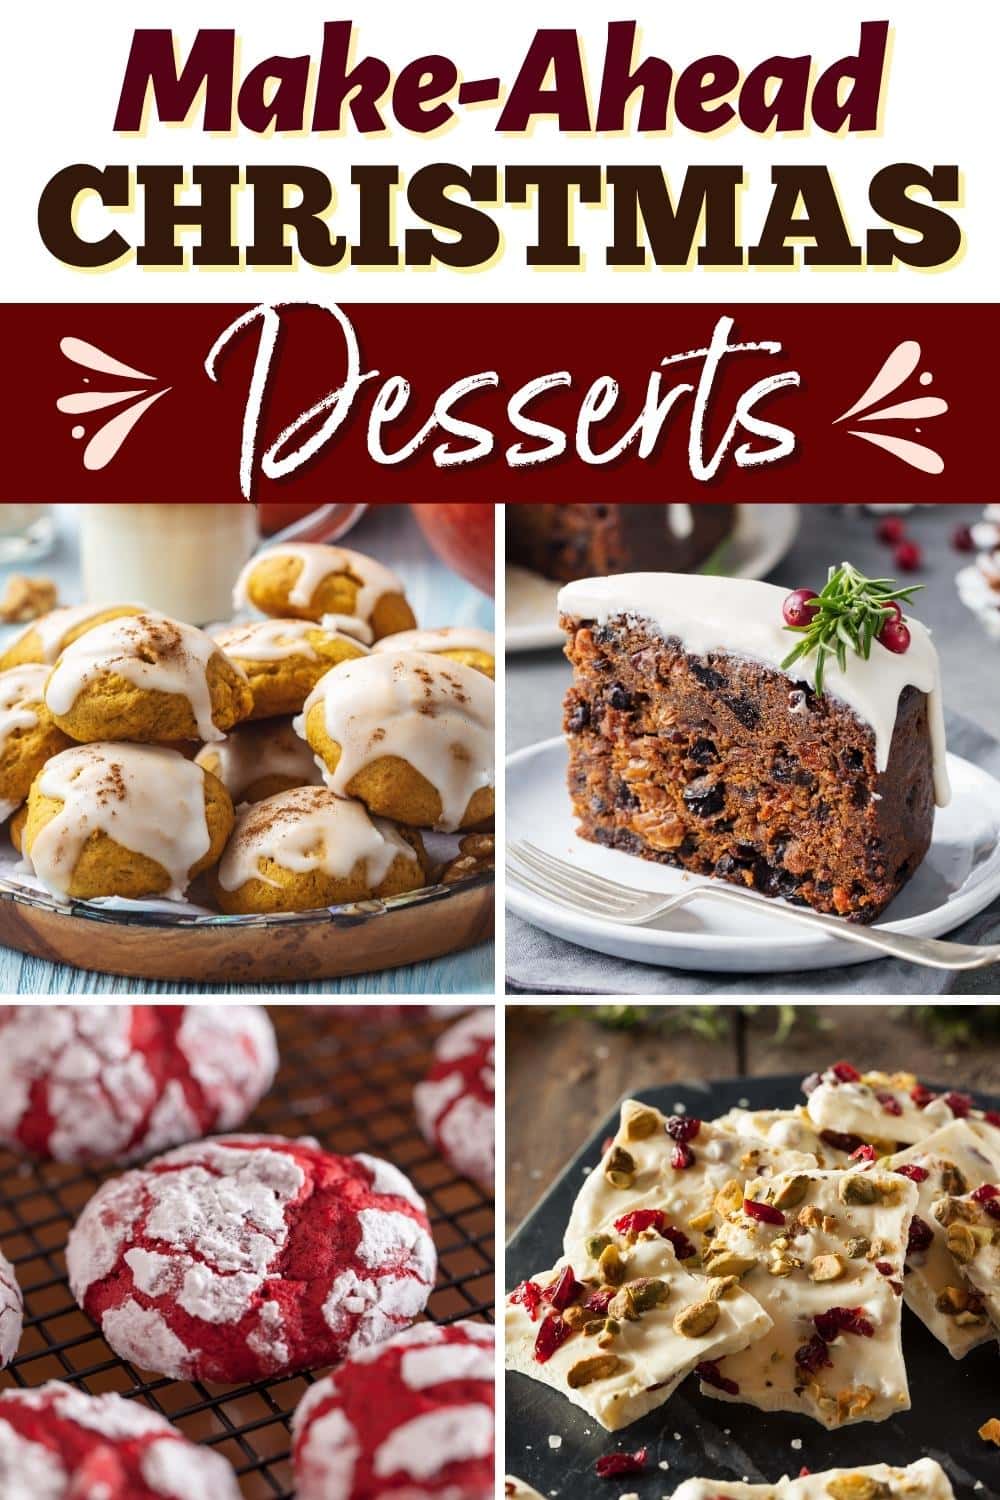 37 Best Make-Ahead Christmas Desserts - Insanely Good